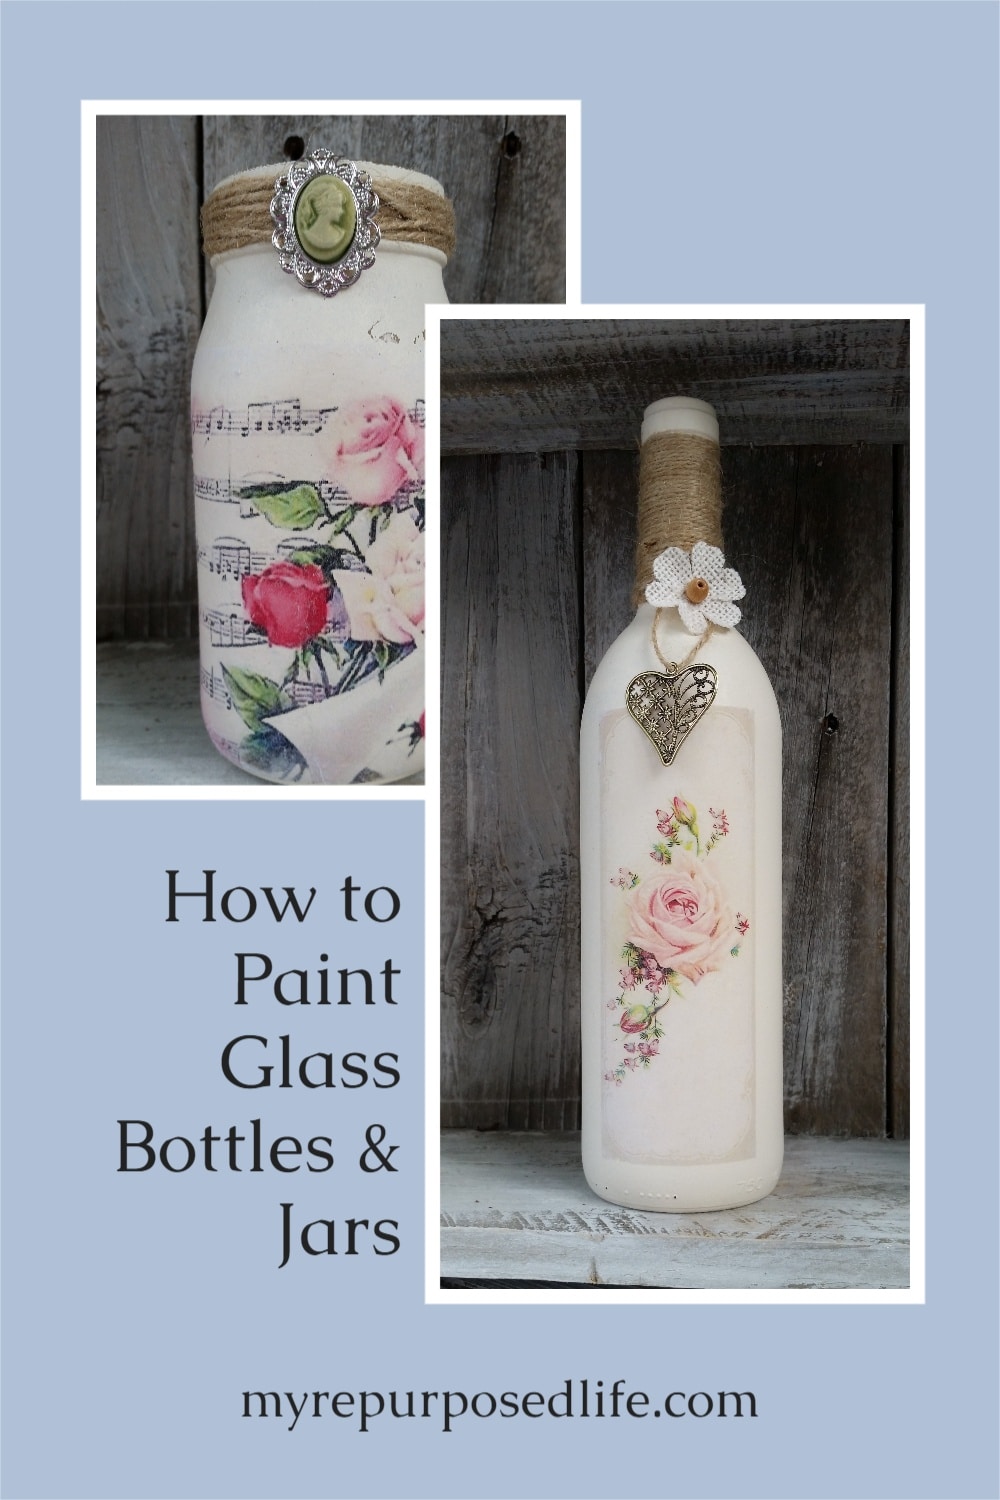 How to remove labels from wine bottles easily and then paint and decorate for awesome home decor ideas! #MyRepurposedLife #repurposed #winebottles #homedecor #easy #projects via @repurposedlife